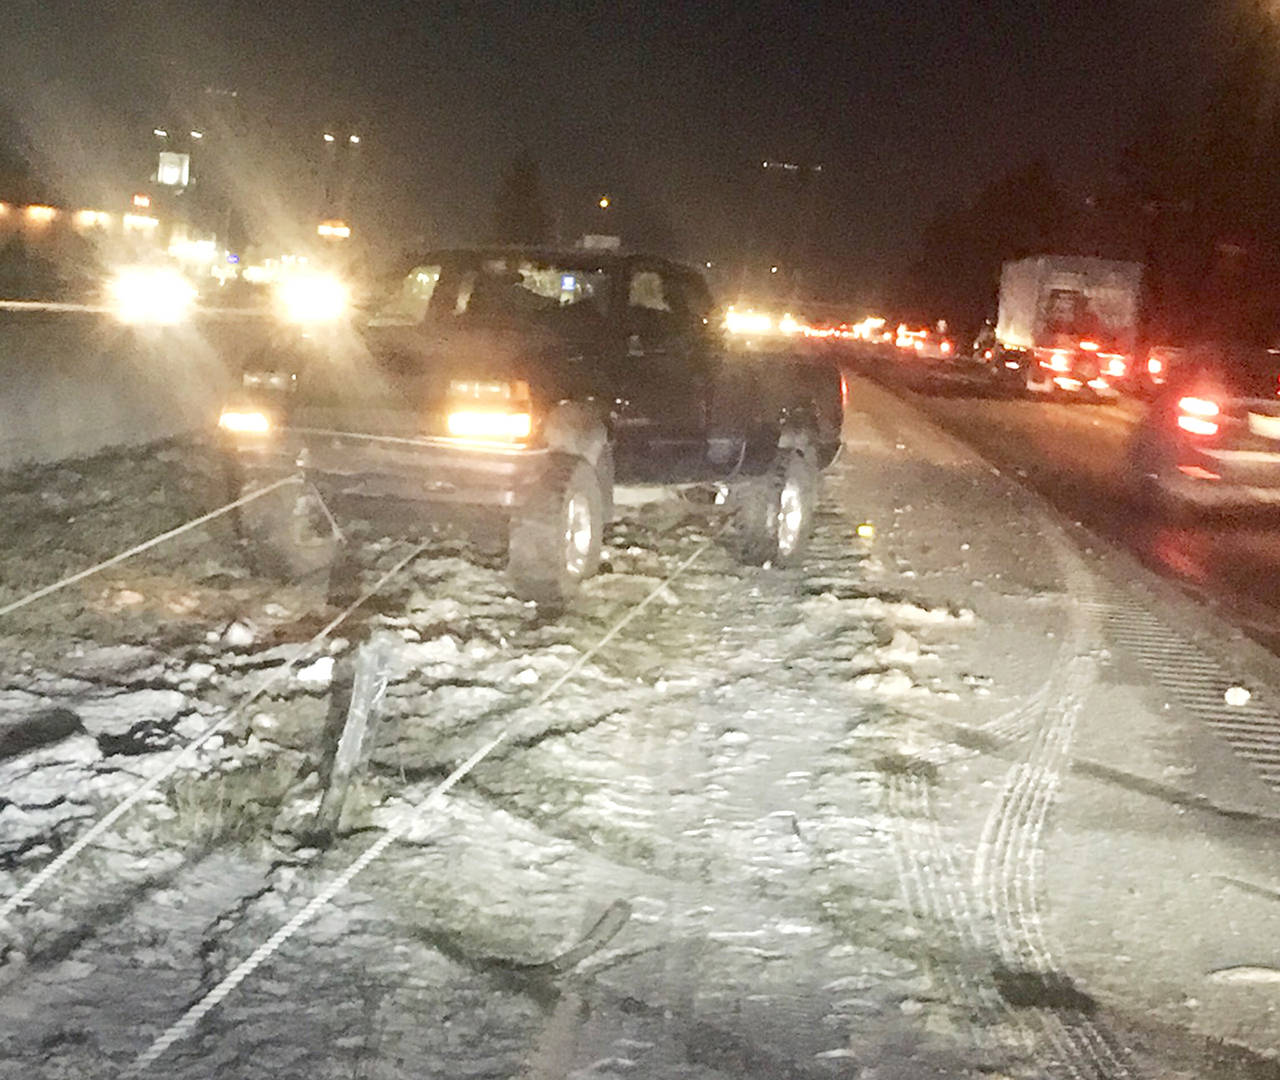 No one was injured when this truck slid into the cable barriers on southbound I-5 on Thursday morning in Smokey Point. (Washington State Patrol)